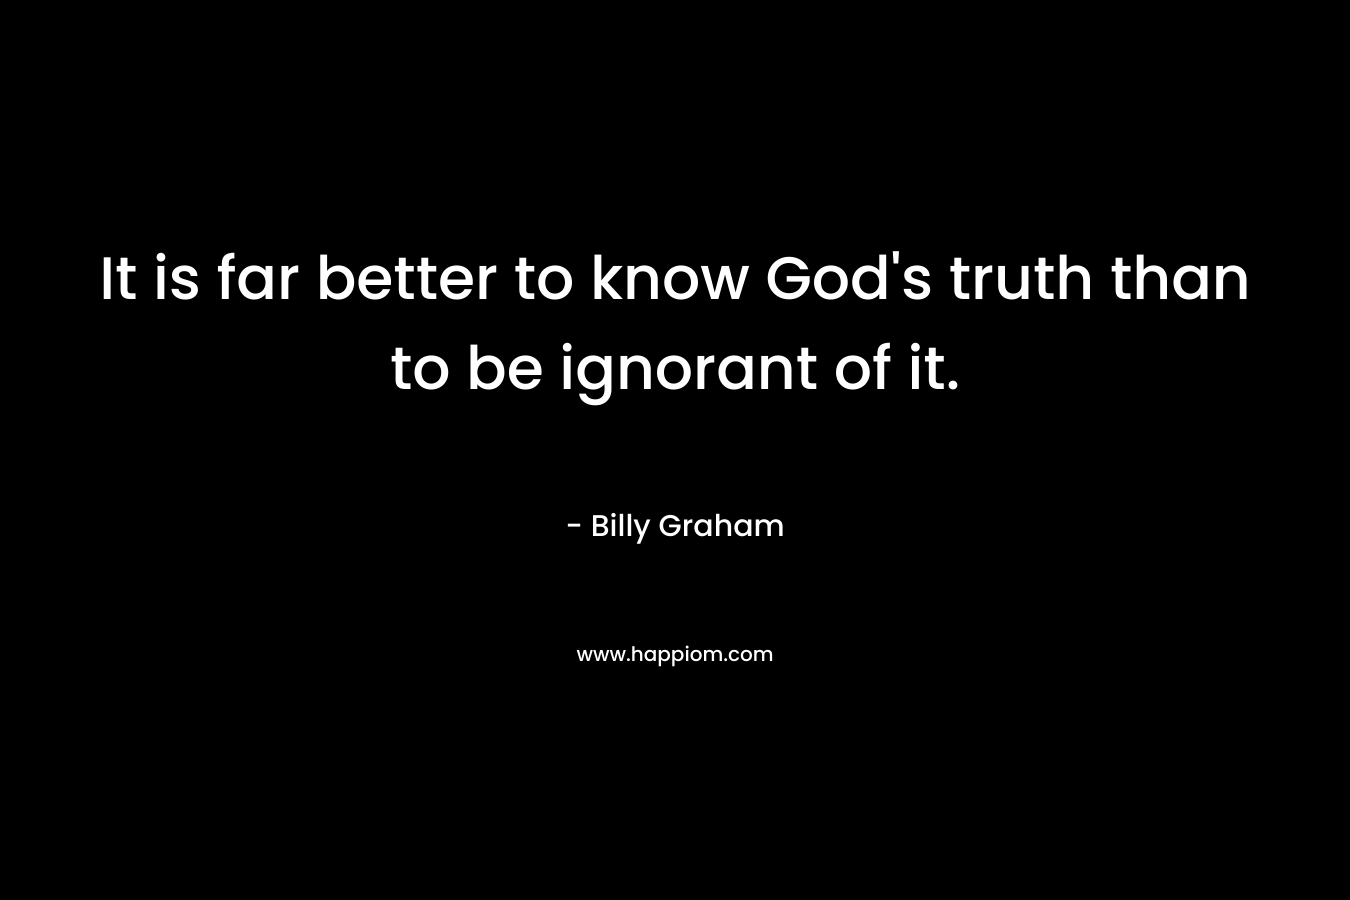 It is far better to know God's truth than to be ignorant of it.